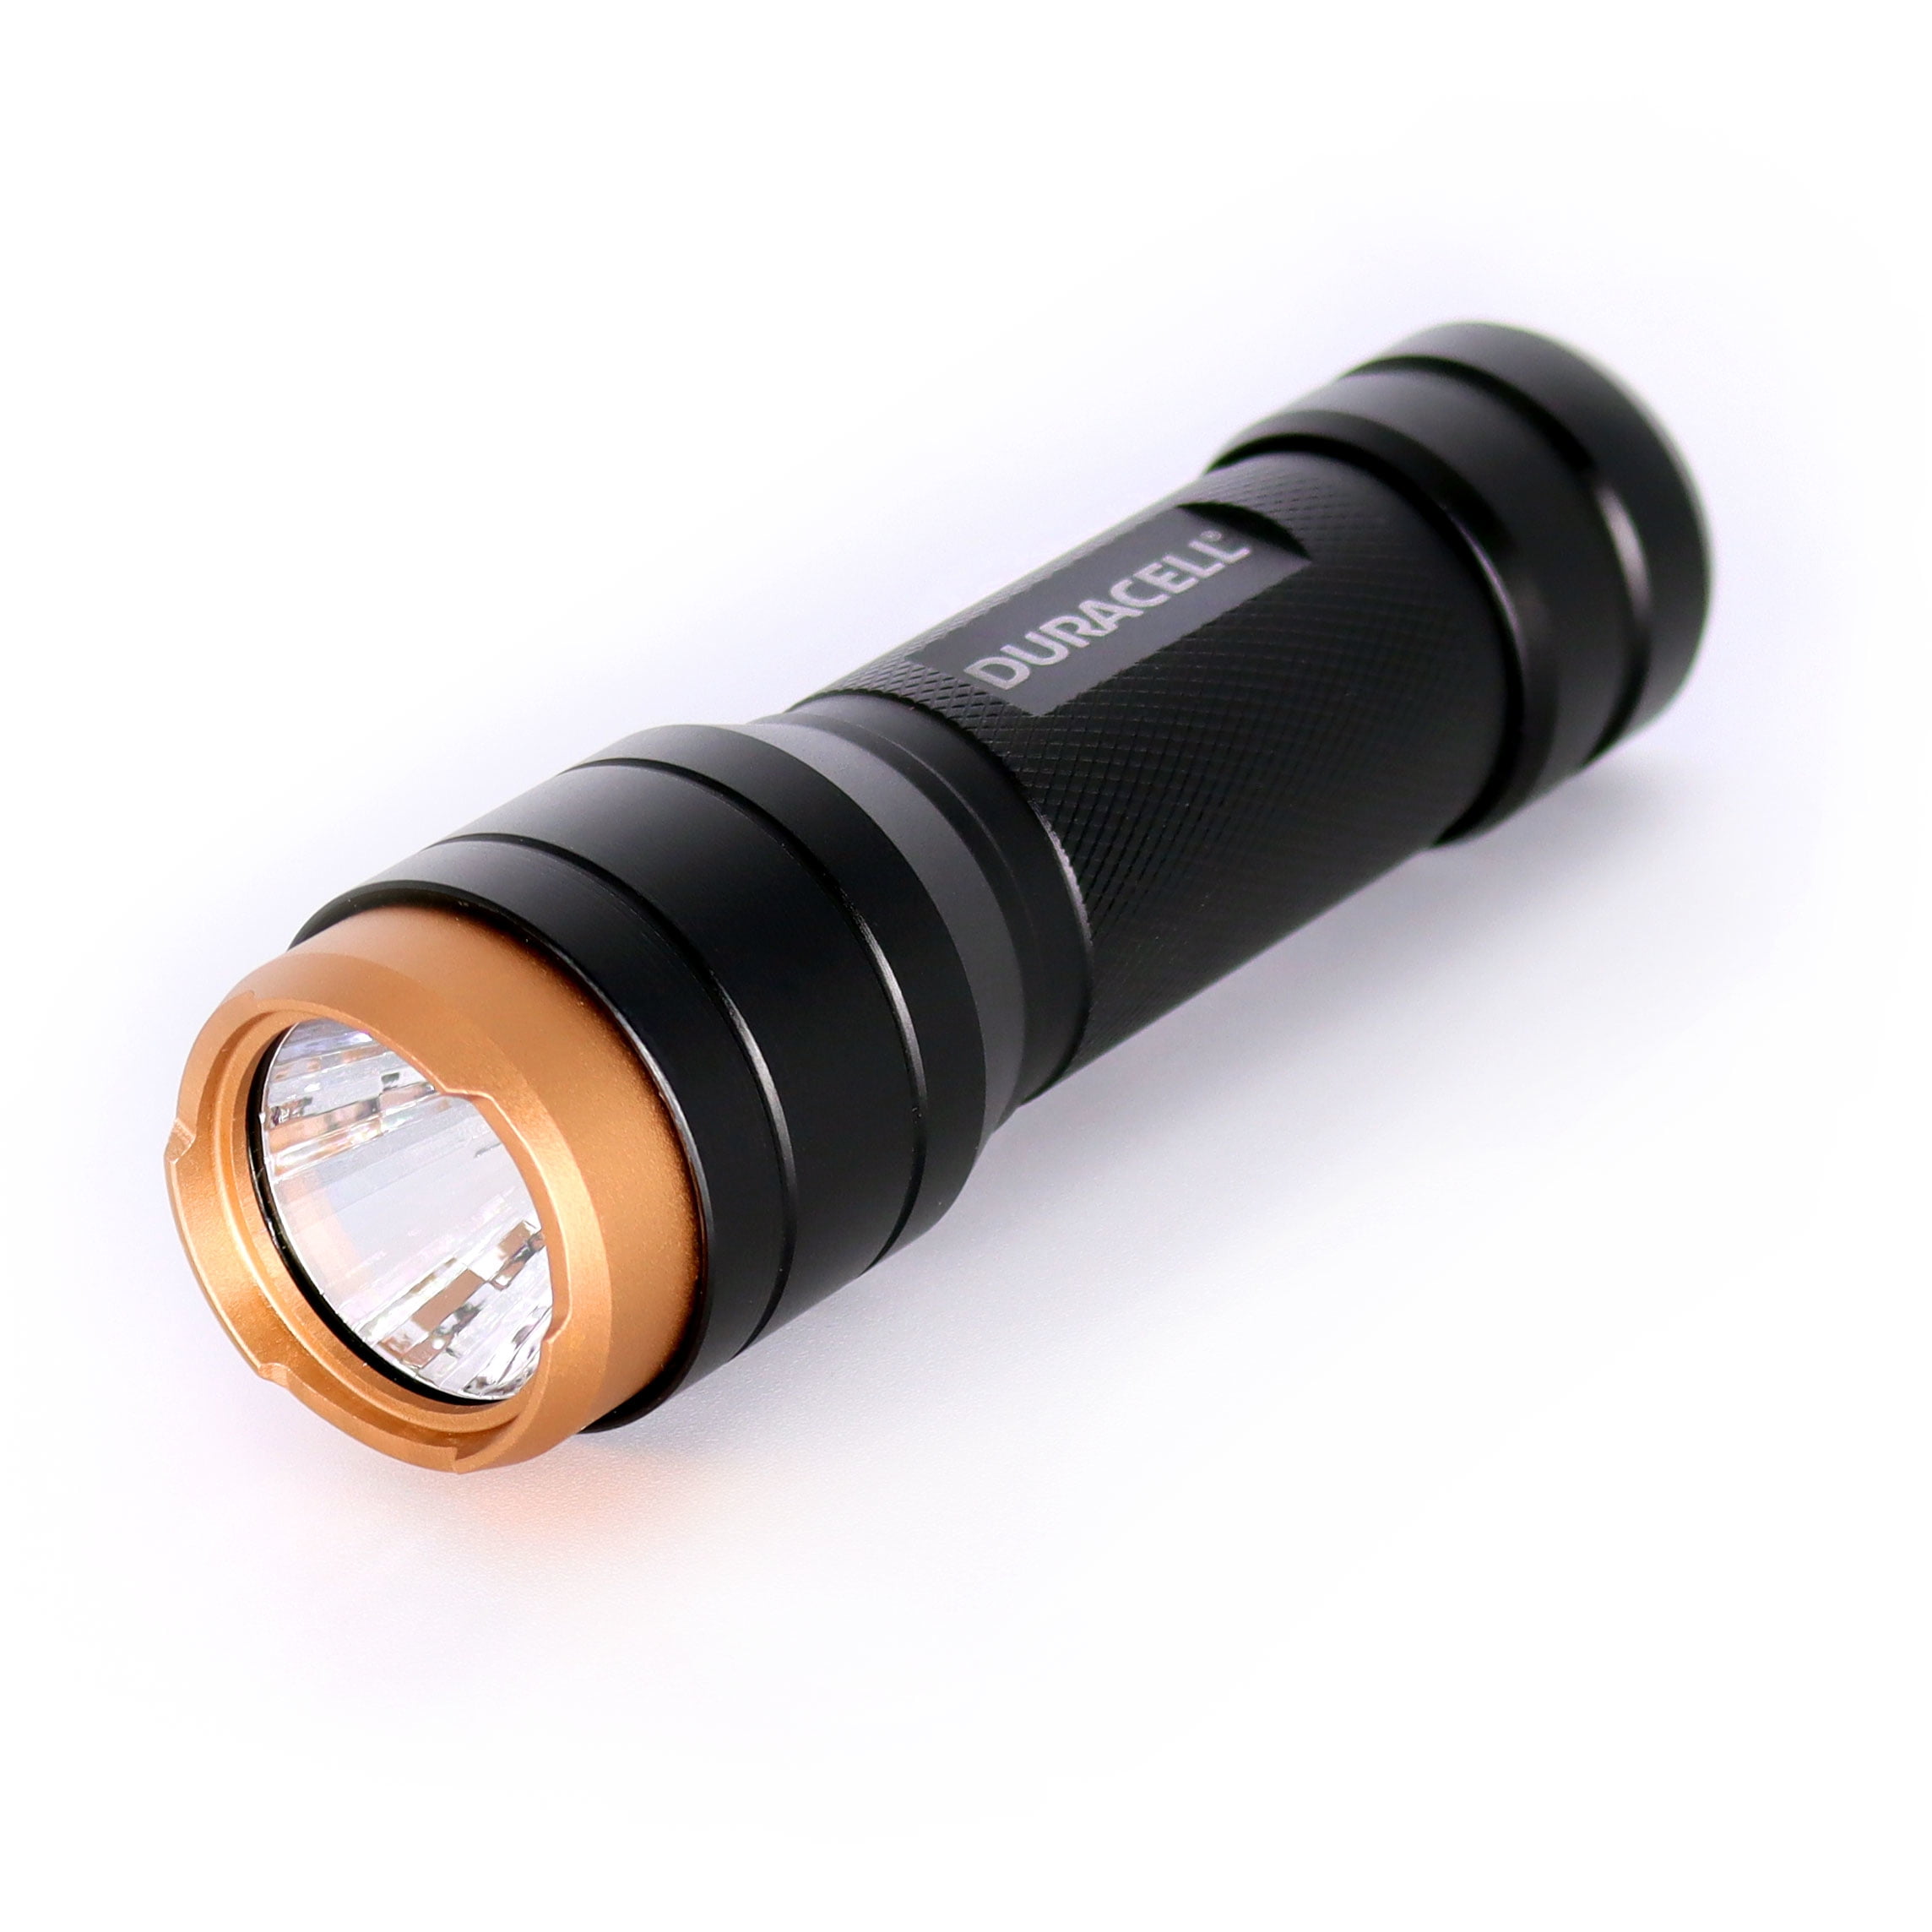 Duracell 2 Pack 400 LM LED Flashlights, with 3 Beam Settings, Duracell AAA Batteries Included.